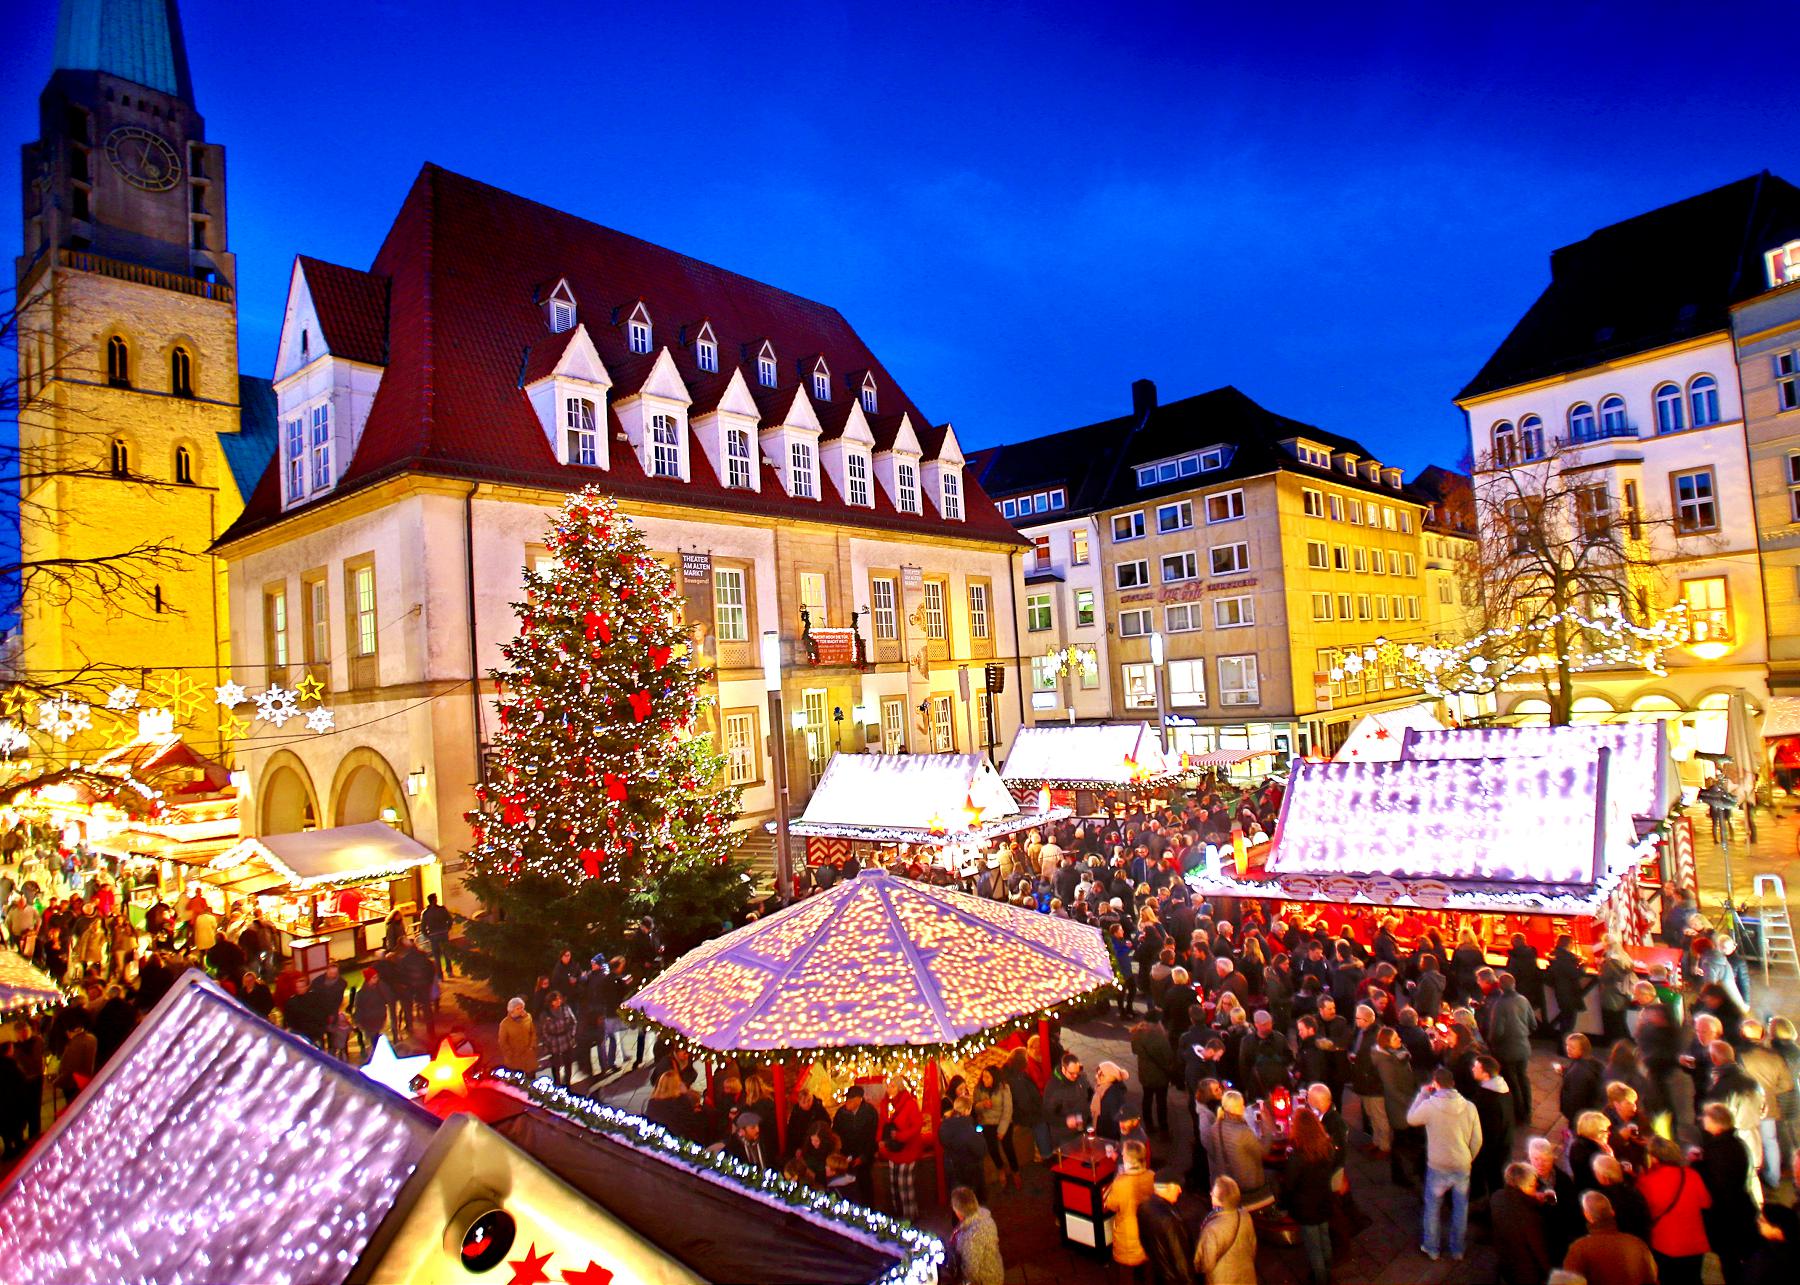 Christmas Market with many stands, photographed in the evening